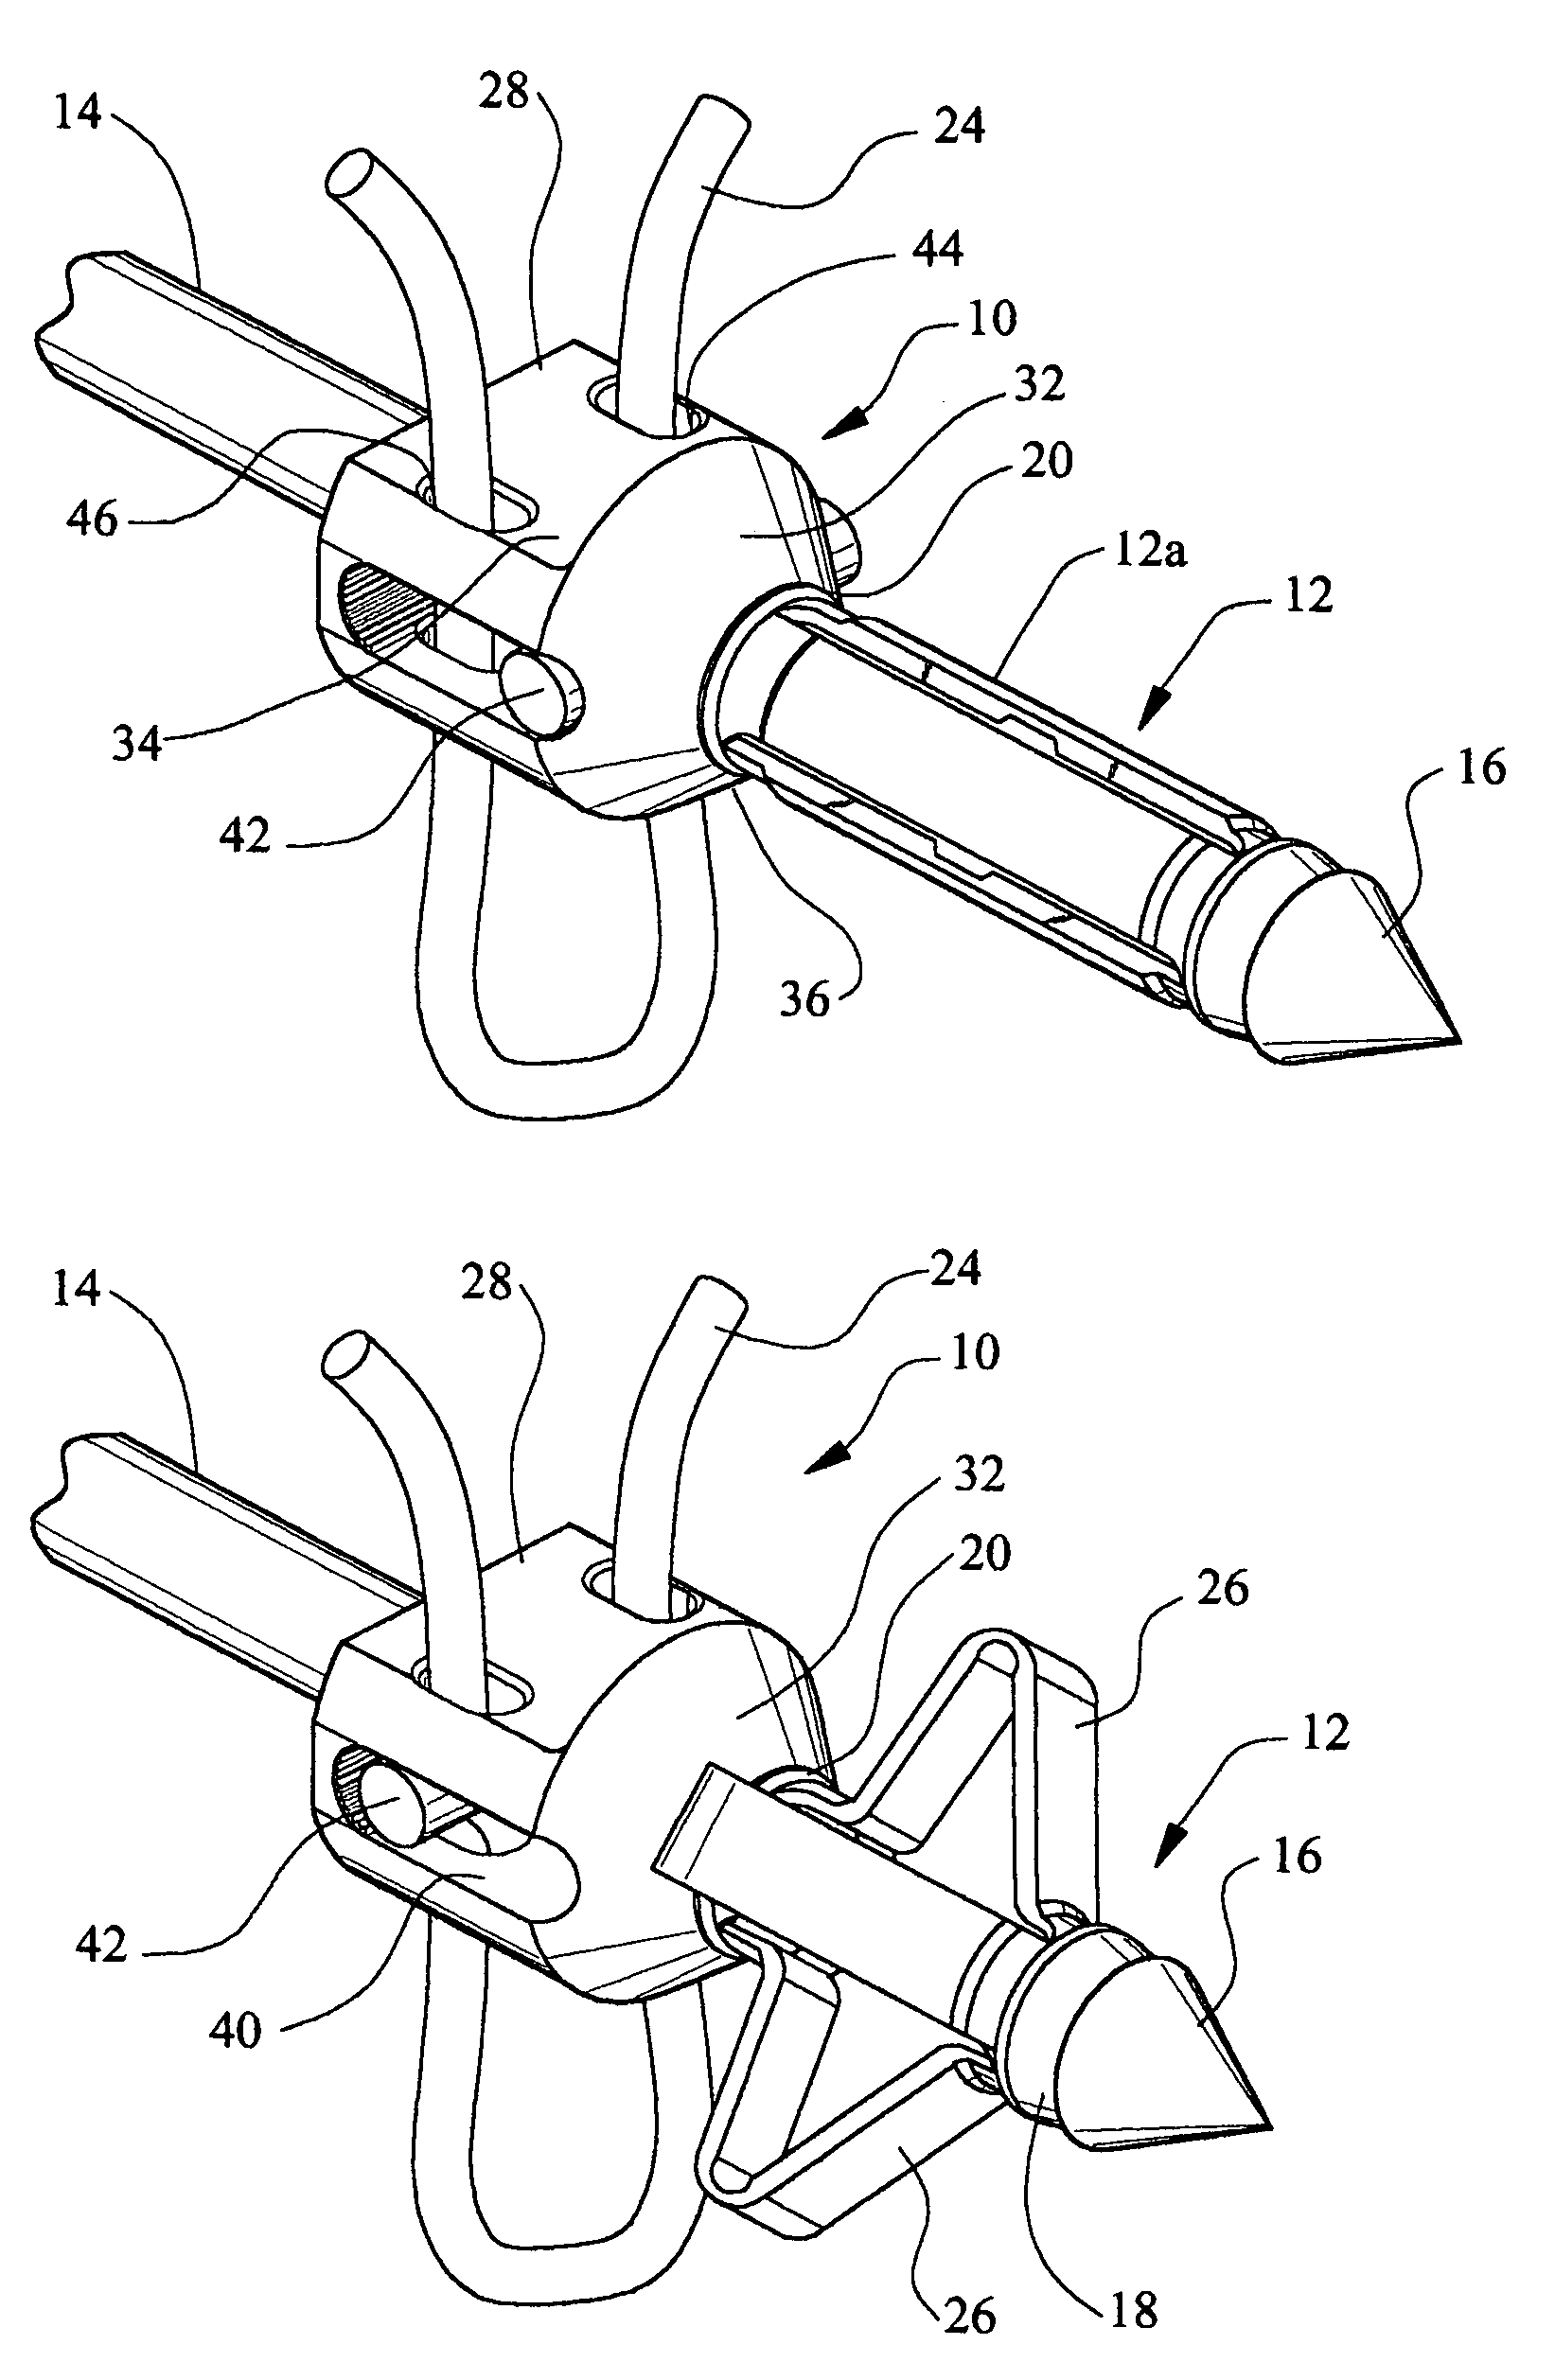 Anchor/suture used for medical procedures